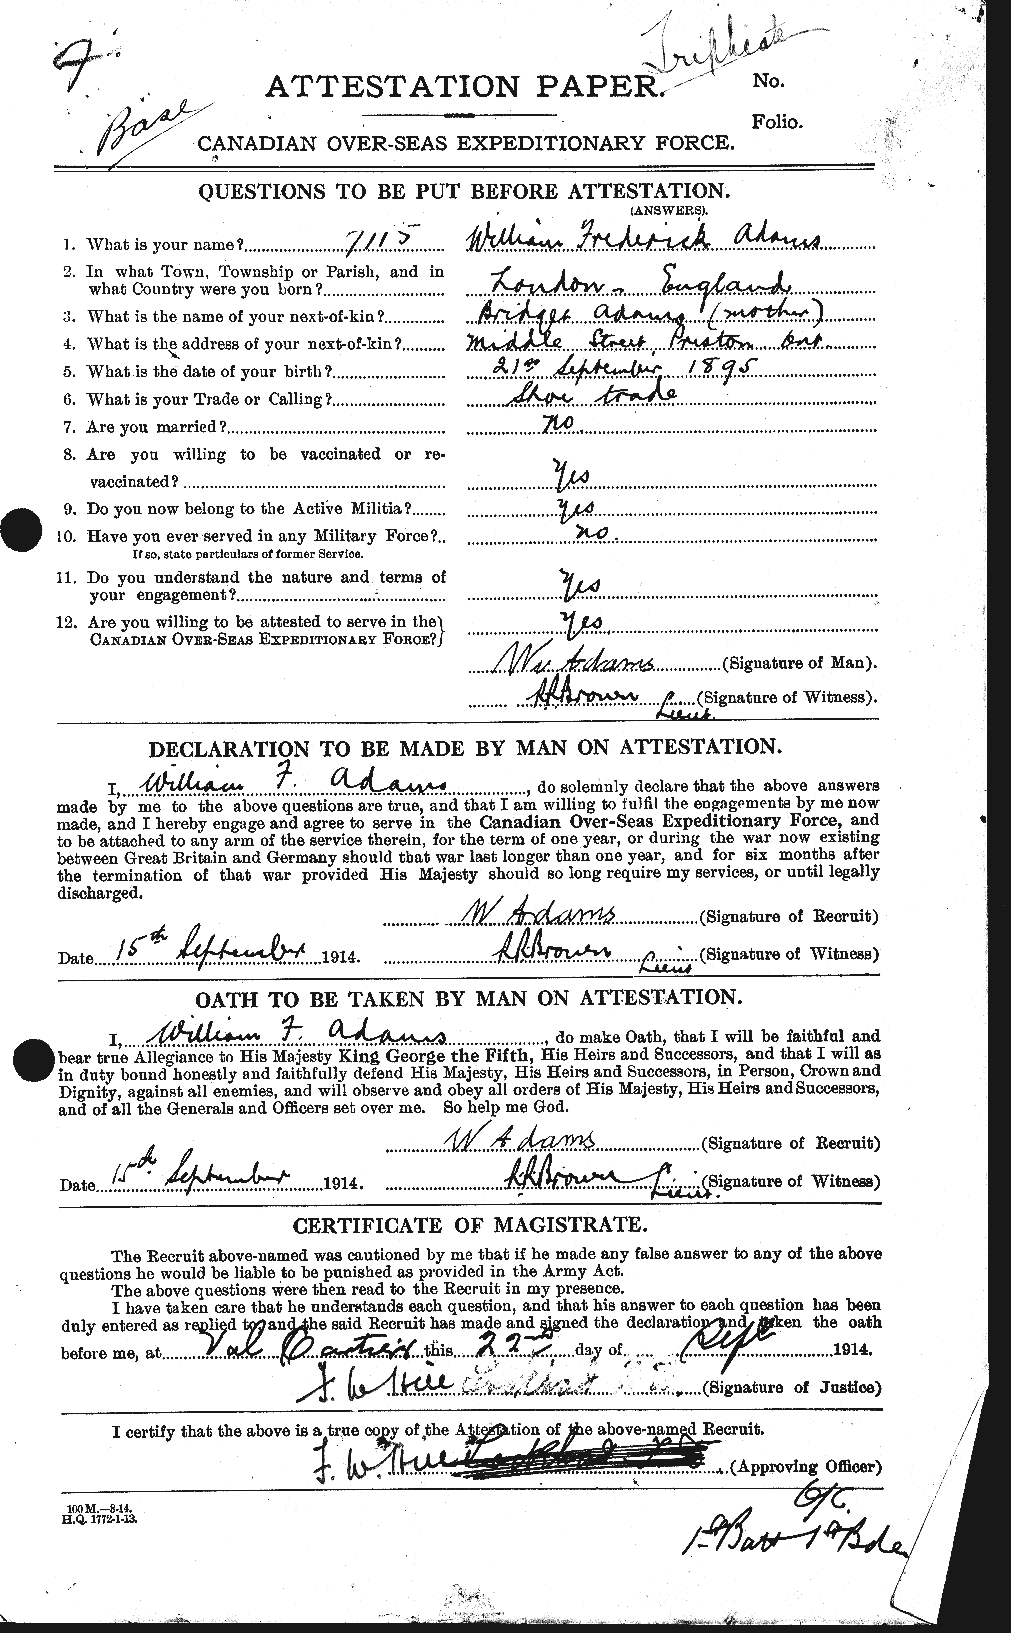 Personnel Records of the First World War - CEF 202251a